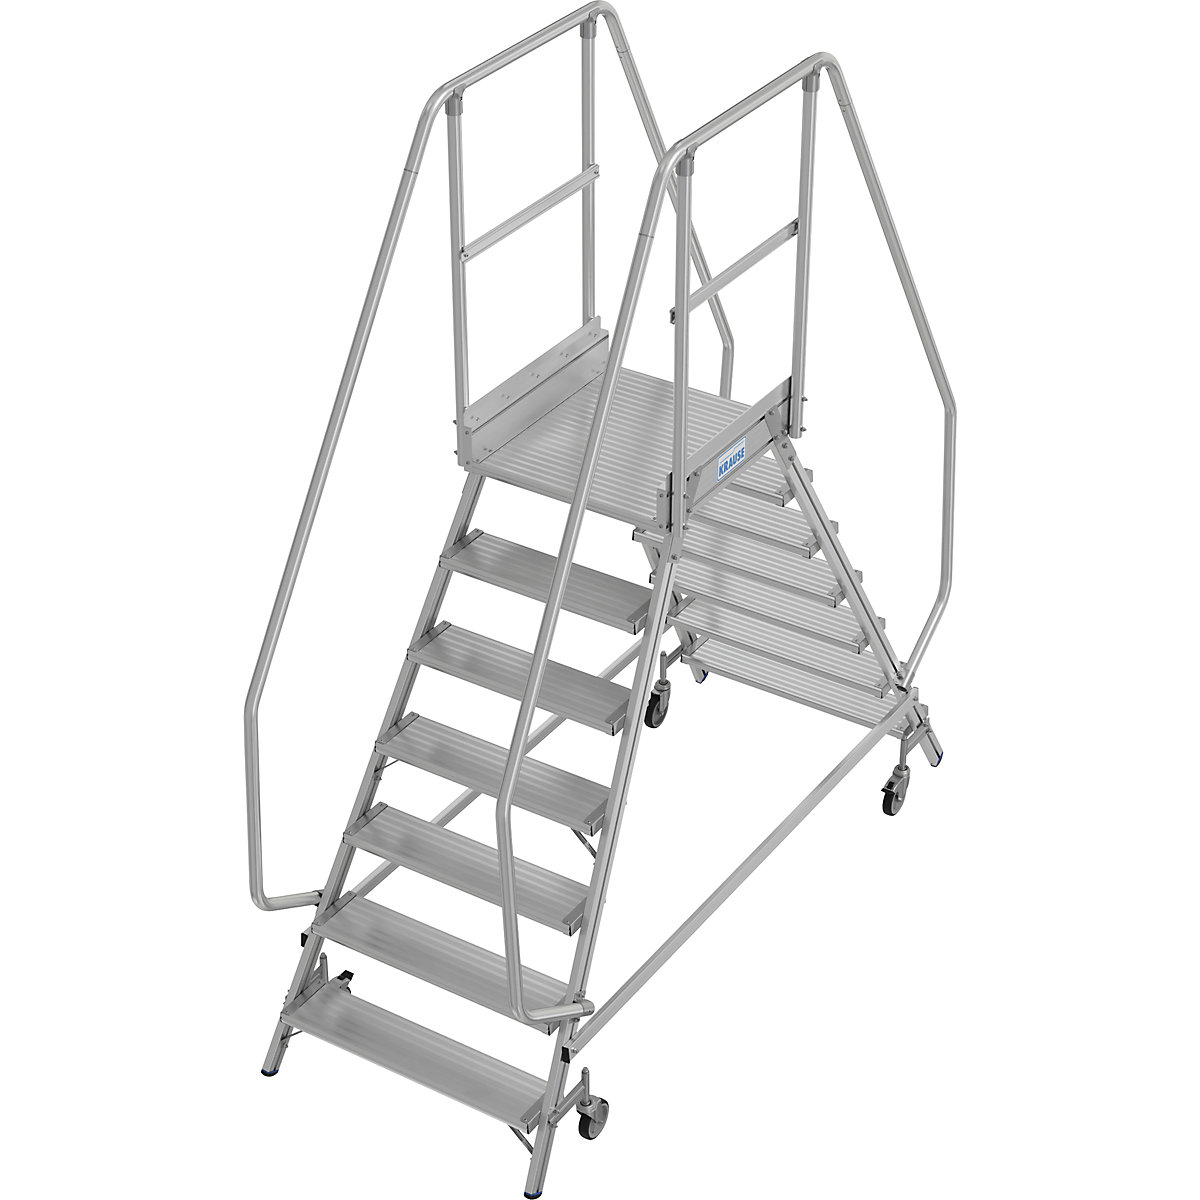 Mobile safety steps – KRAUSE, double sided access, foot rail, 2 x 7 steps-9